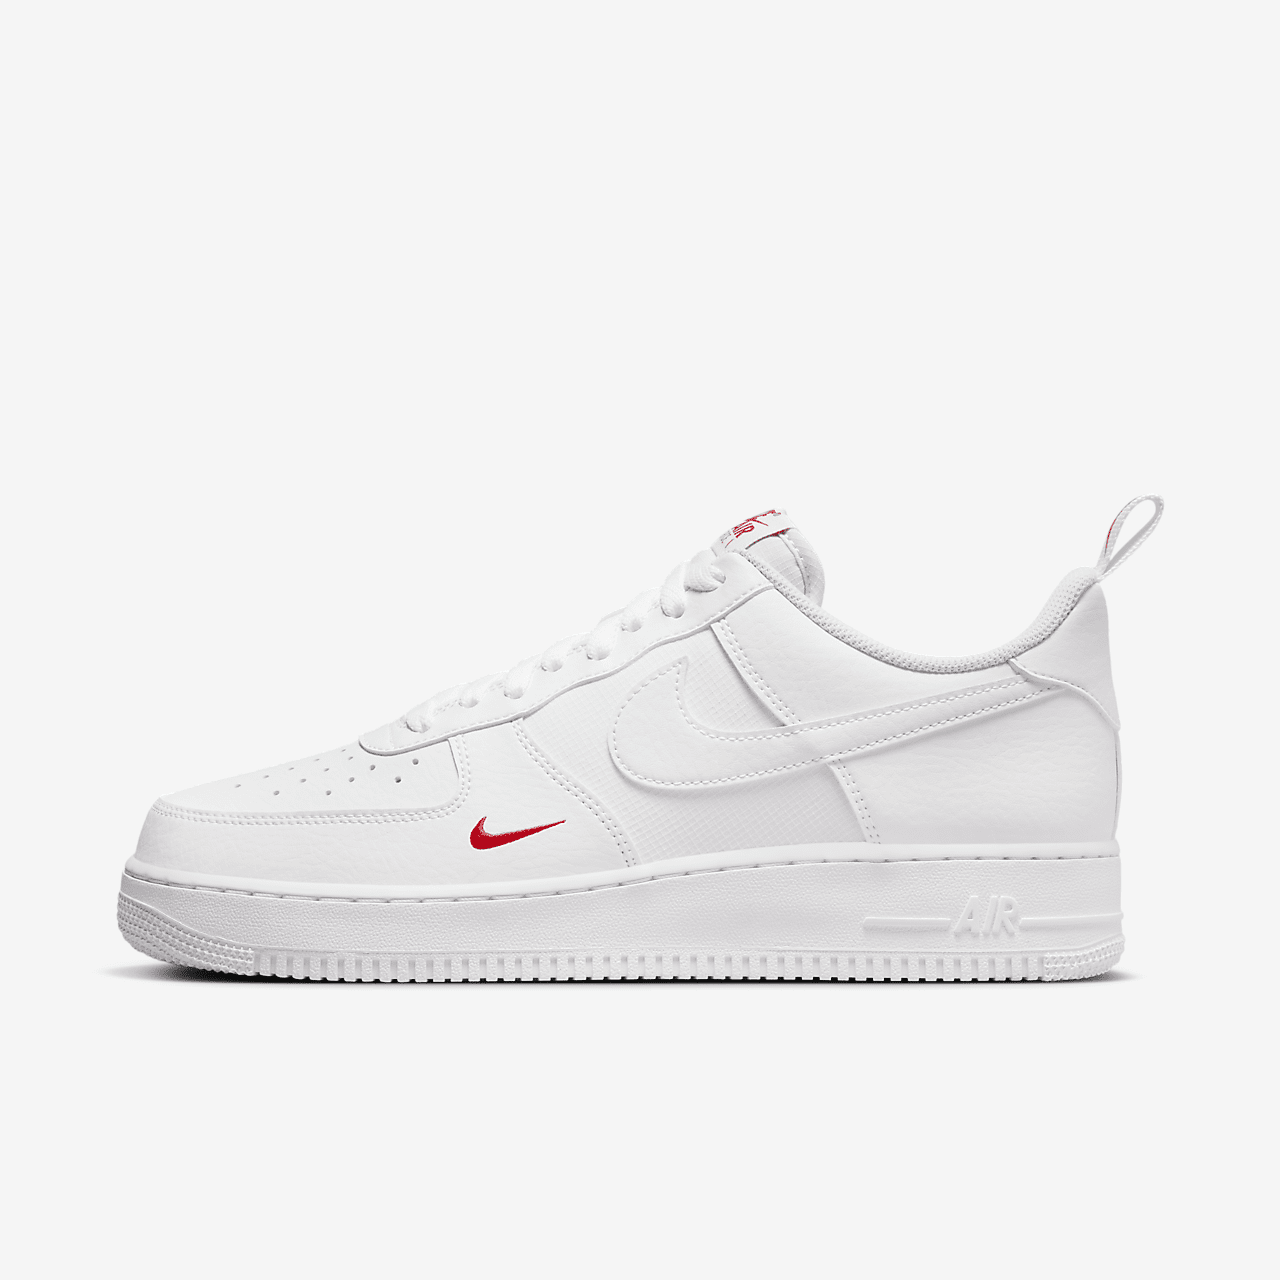 Nike Air Force 1 '07 'White University Red' FZ7187-100